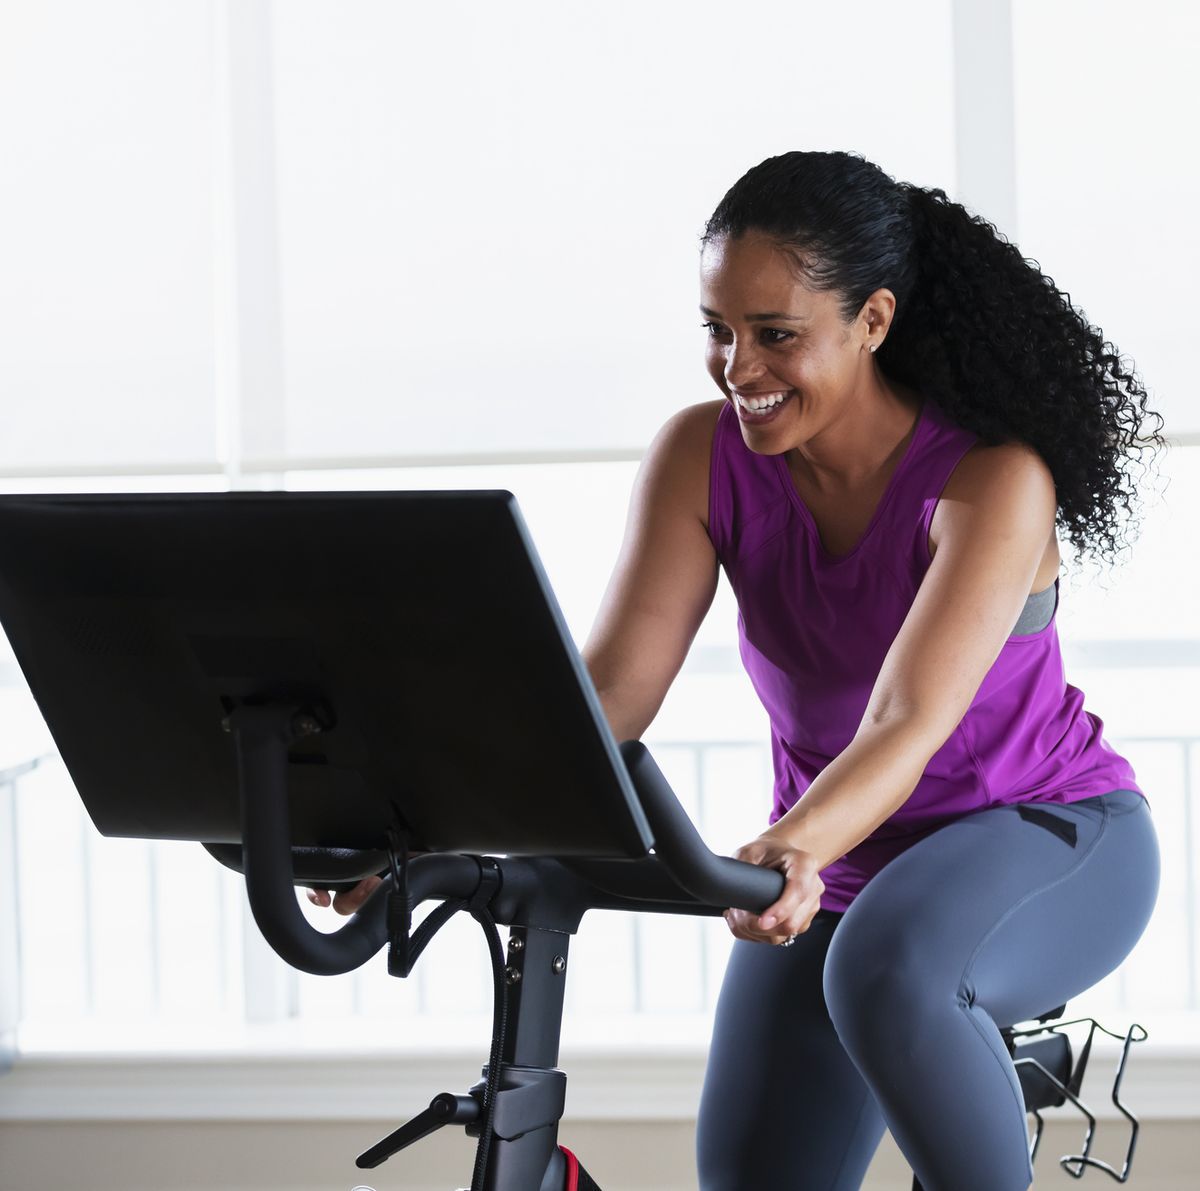 Low Impact Cardio Exercises: 6 Workouts To Try At Home